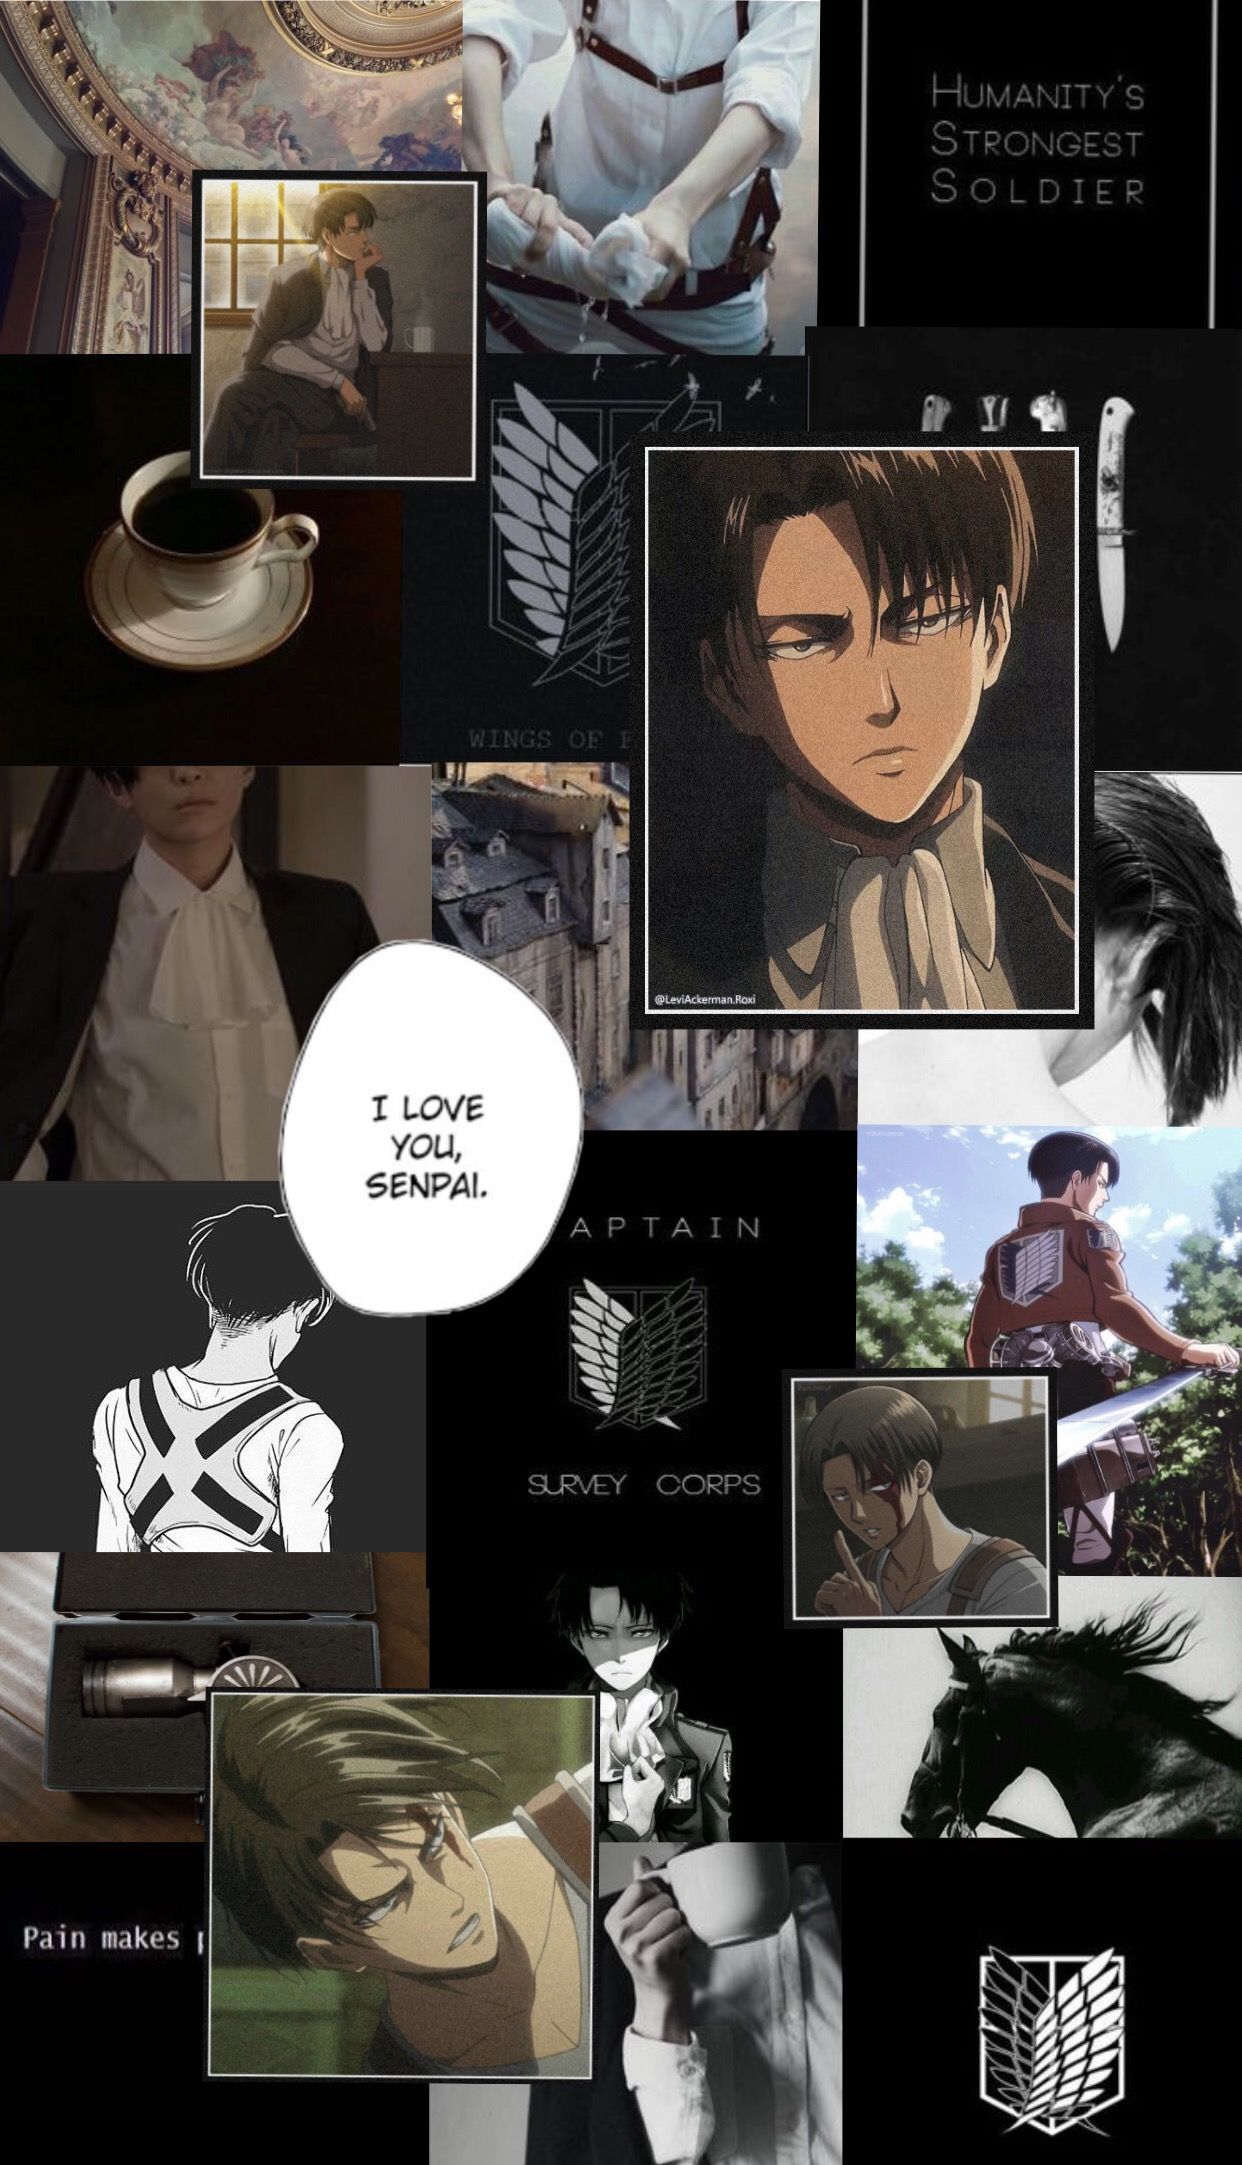 79 Levi Ackerman Wallpapers for iPhone and Android by Carla Carrillo